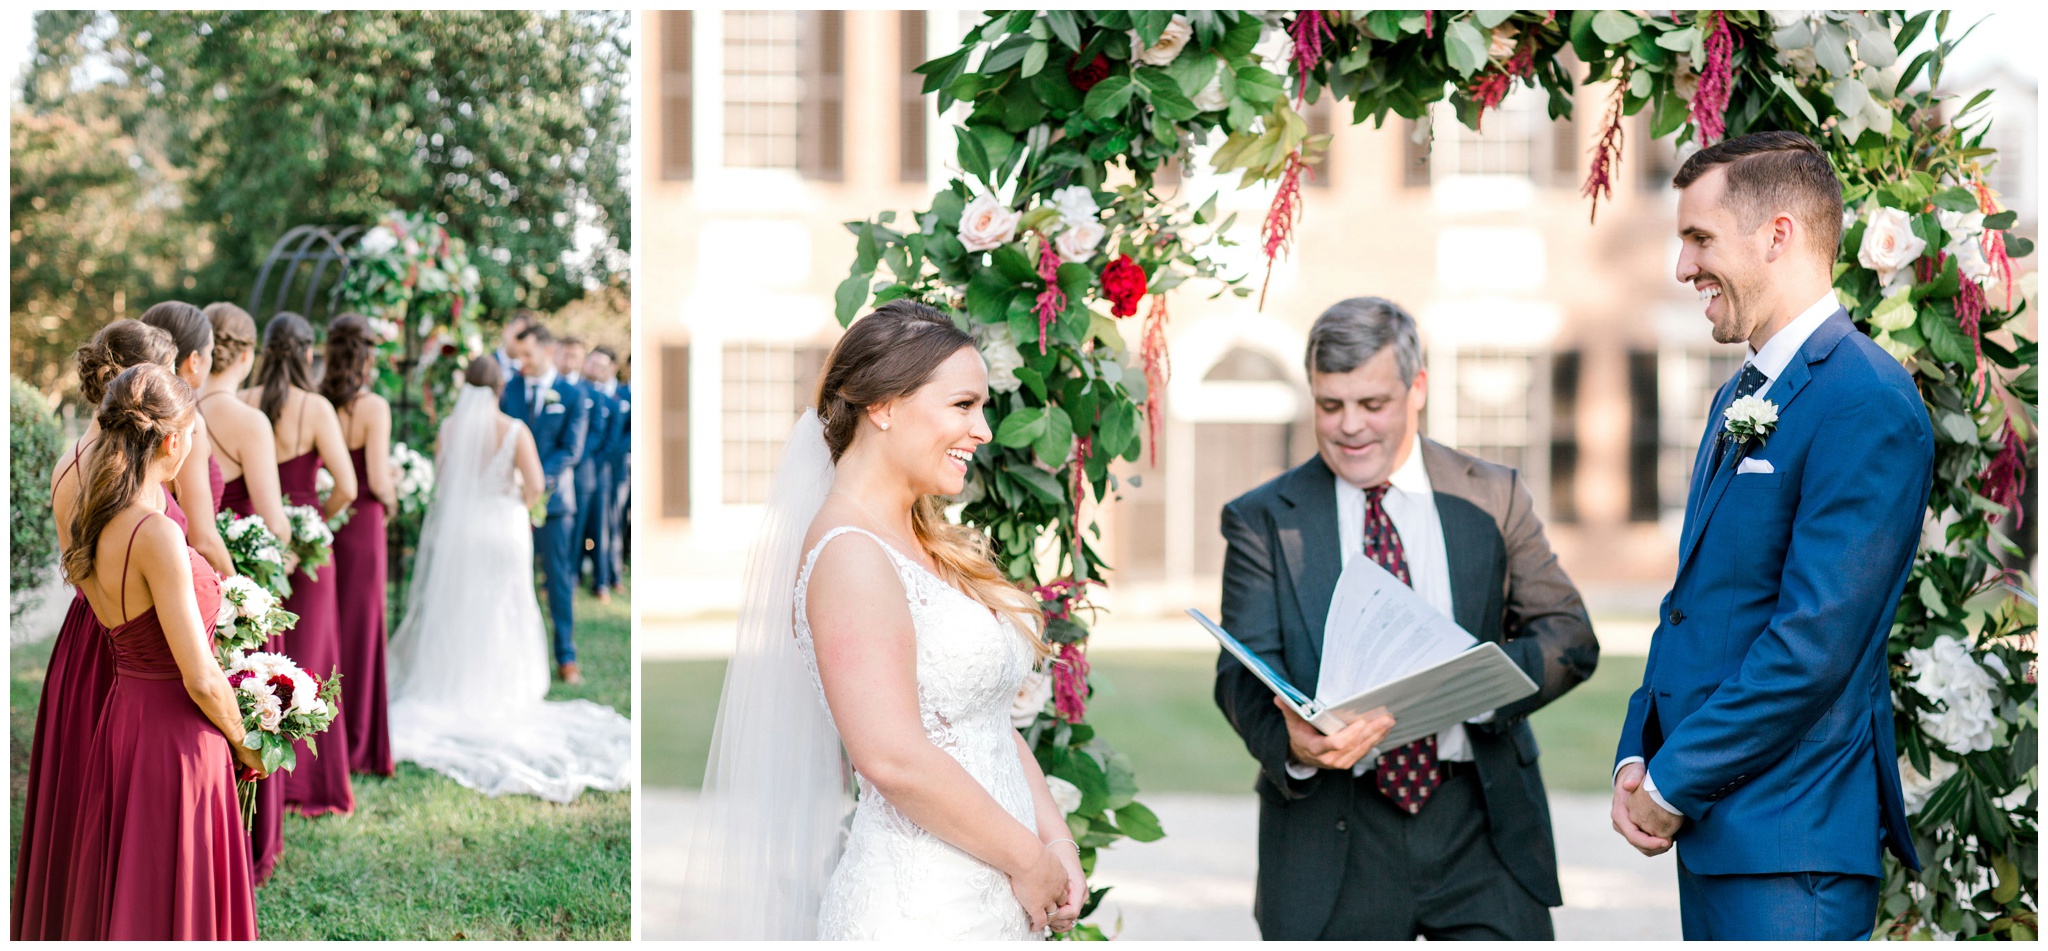 Woodlawn and Pope-Leighey House Outdoor Ceremony